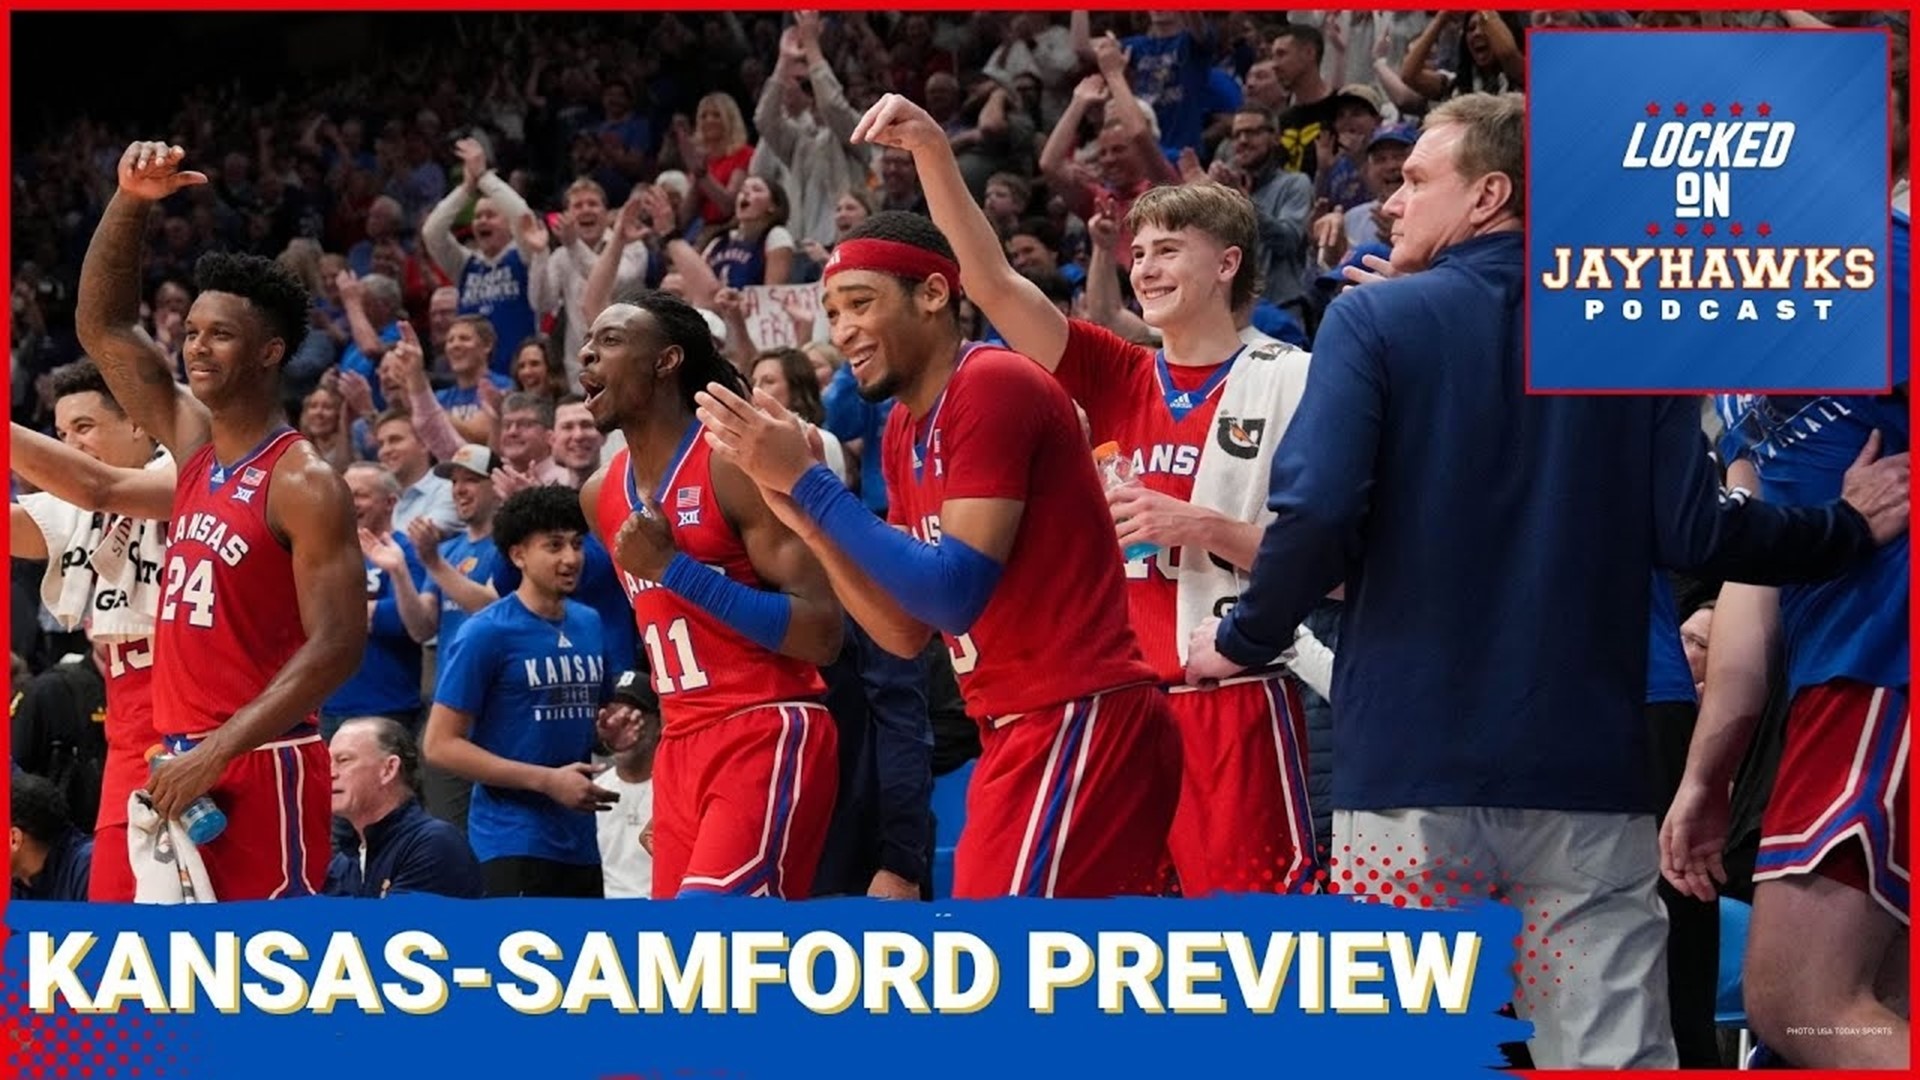 Preview for 4-seed Kansas Jayhawks basketball vs 13-seed Samford Bulldogs in the 2024 NCAA Tournament first round in Salt Lake City, UT and the Midwest Region.